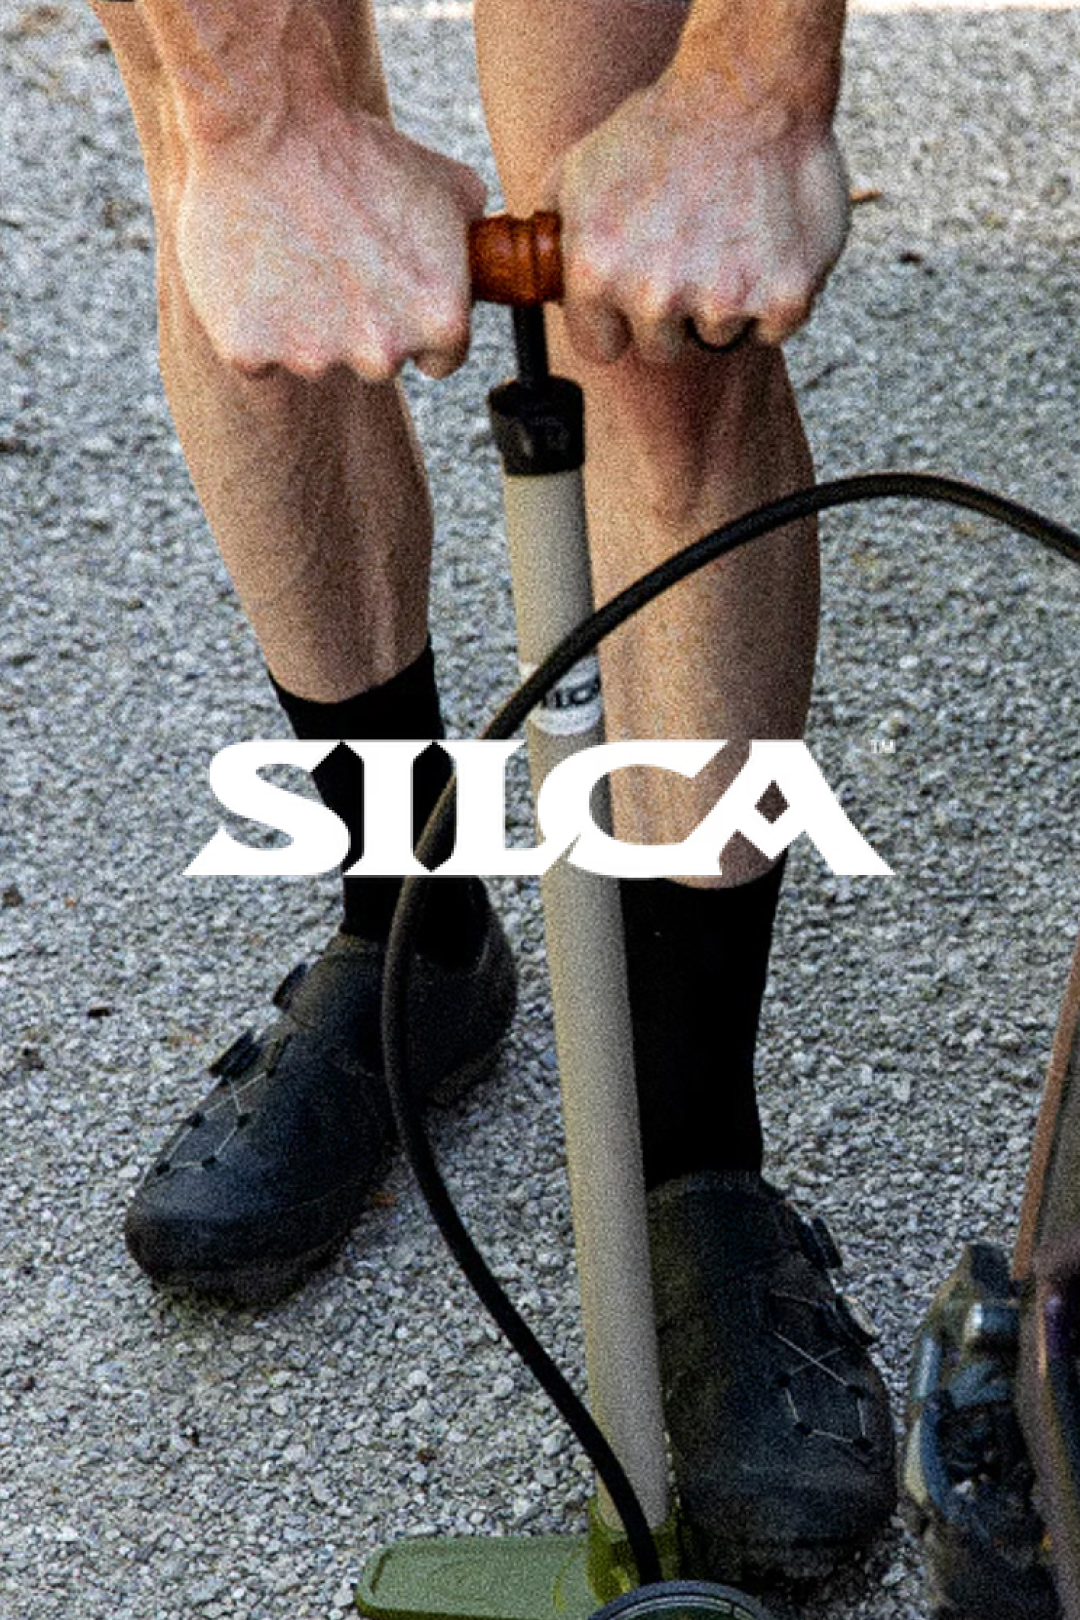 Cyclist using a classic SILCA floor pump to inflate bike tires before a ride @ Bici.